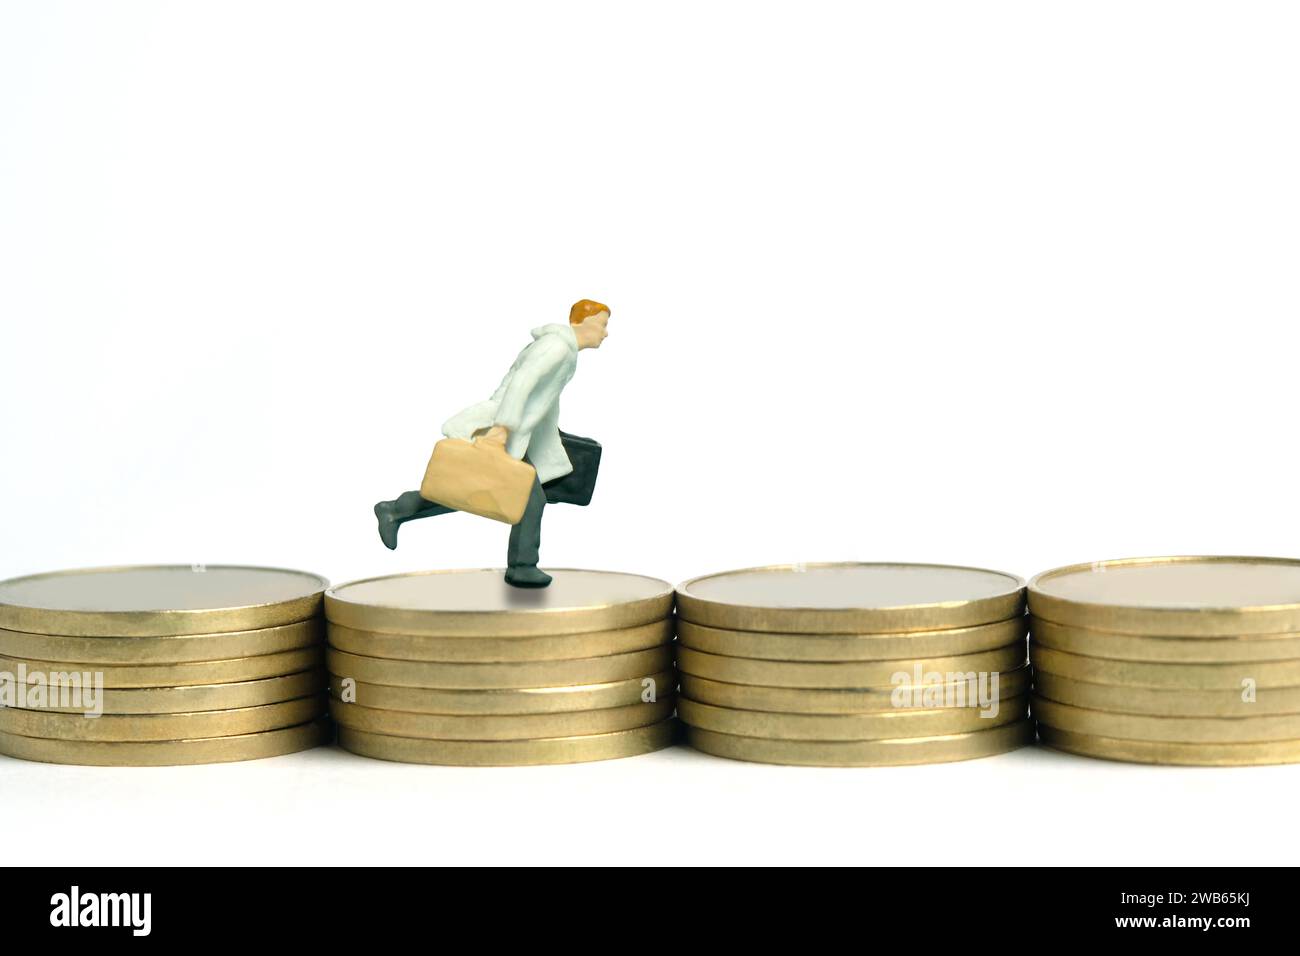 Miniature tiny people toy figure photography. A businessman wearing coat running above flat coin stack. Isolated on white background. Image photo Stock Photo